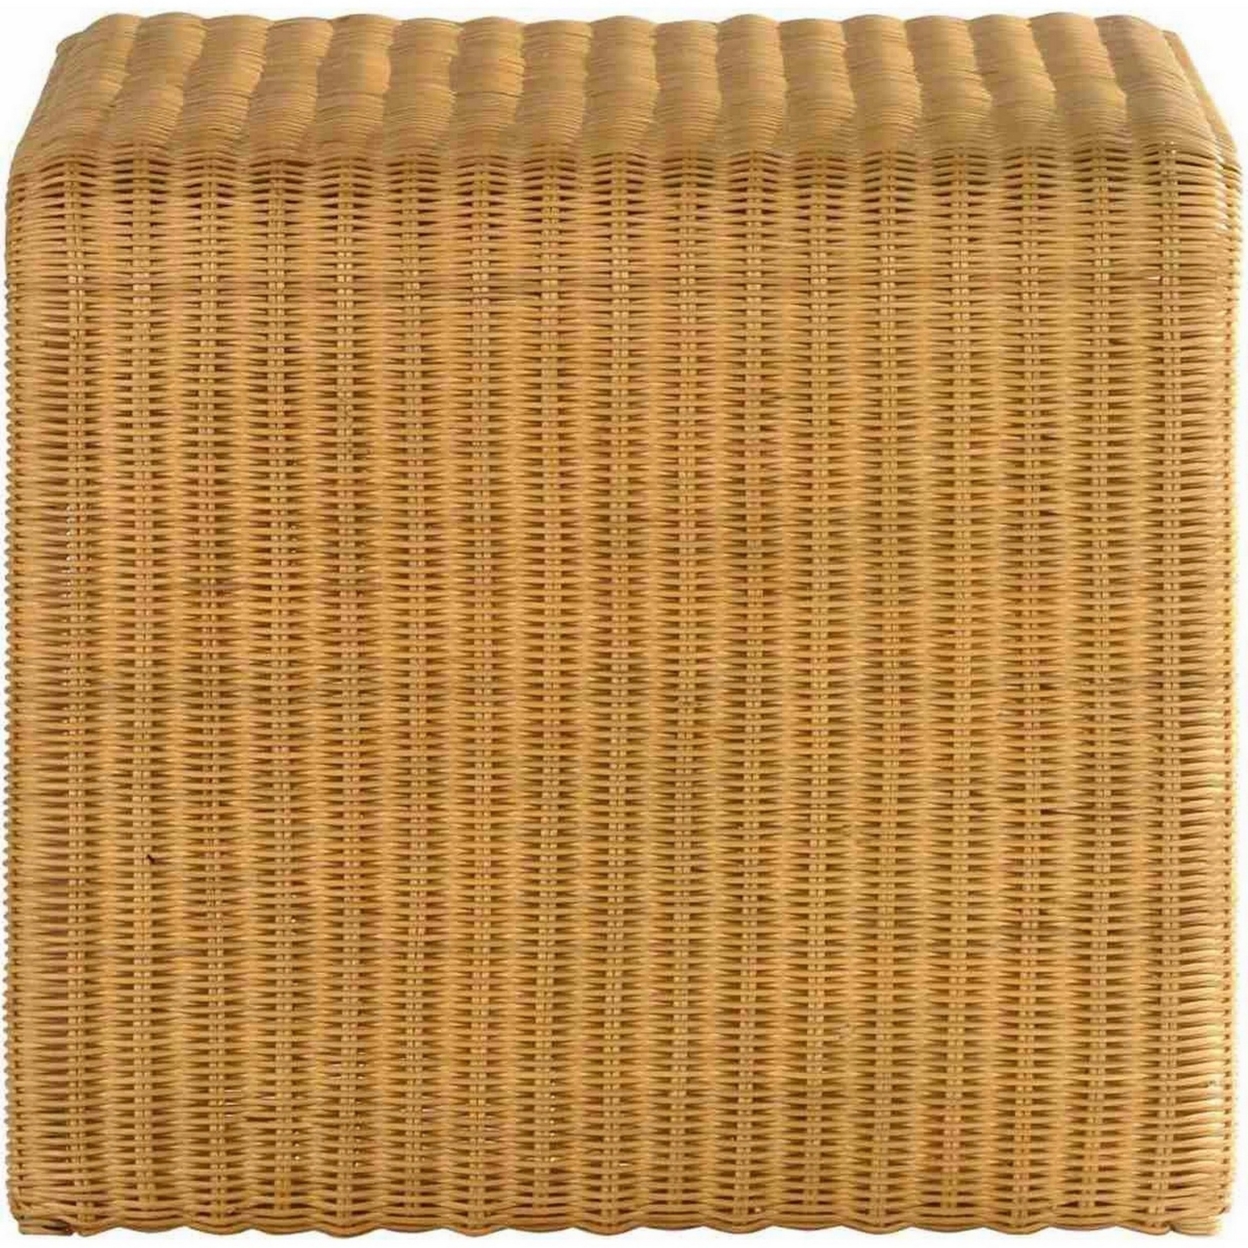 22 Inch Side End Table, Woven Rattan Frame, Waterfall Edges, Square Surface- Saltoro Sherpi